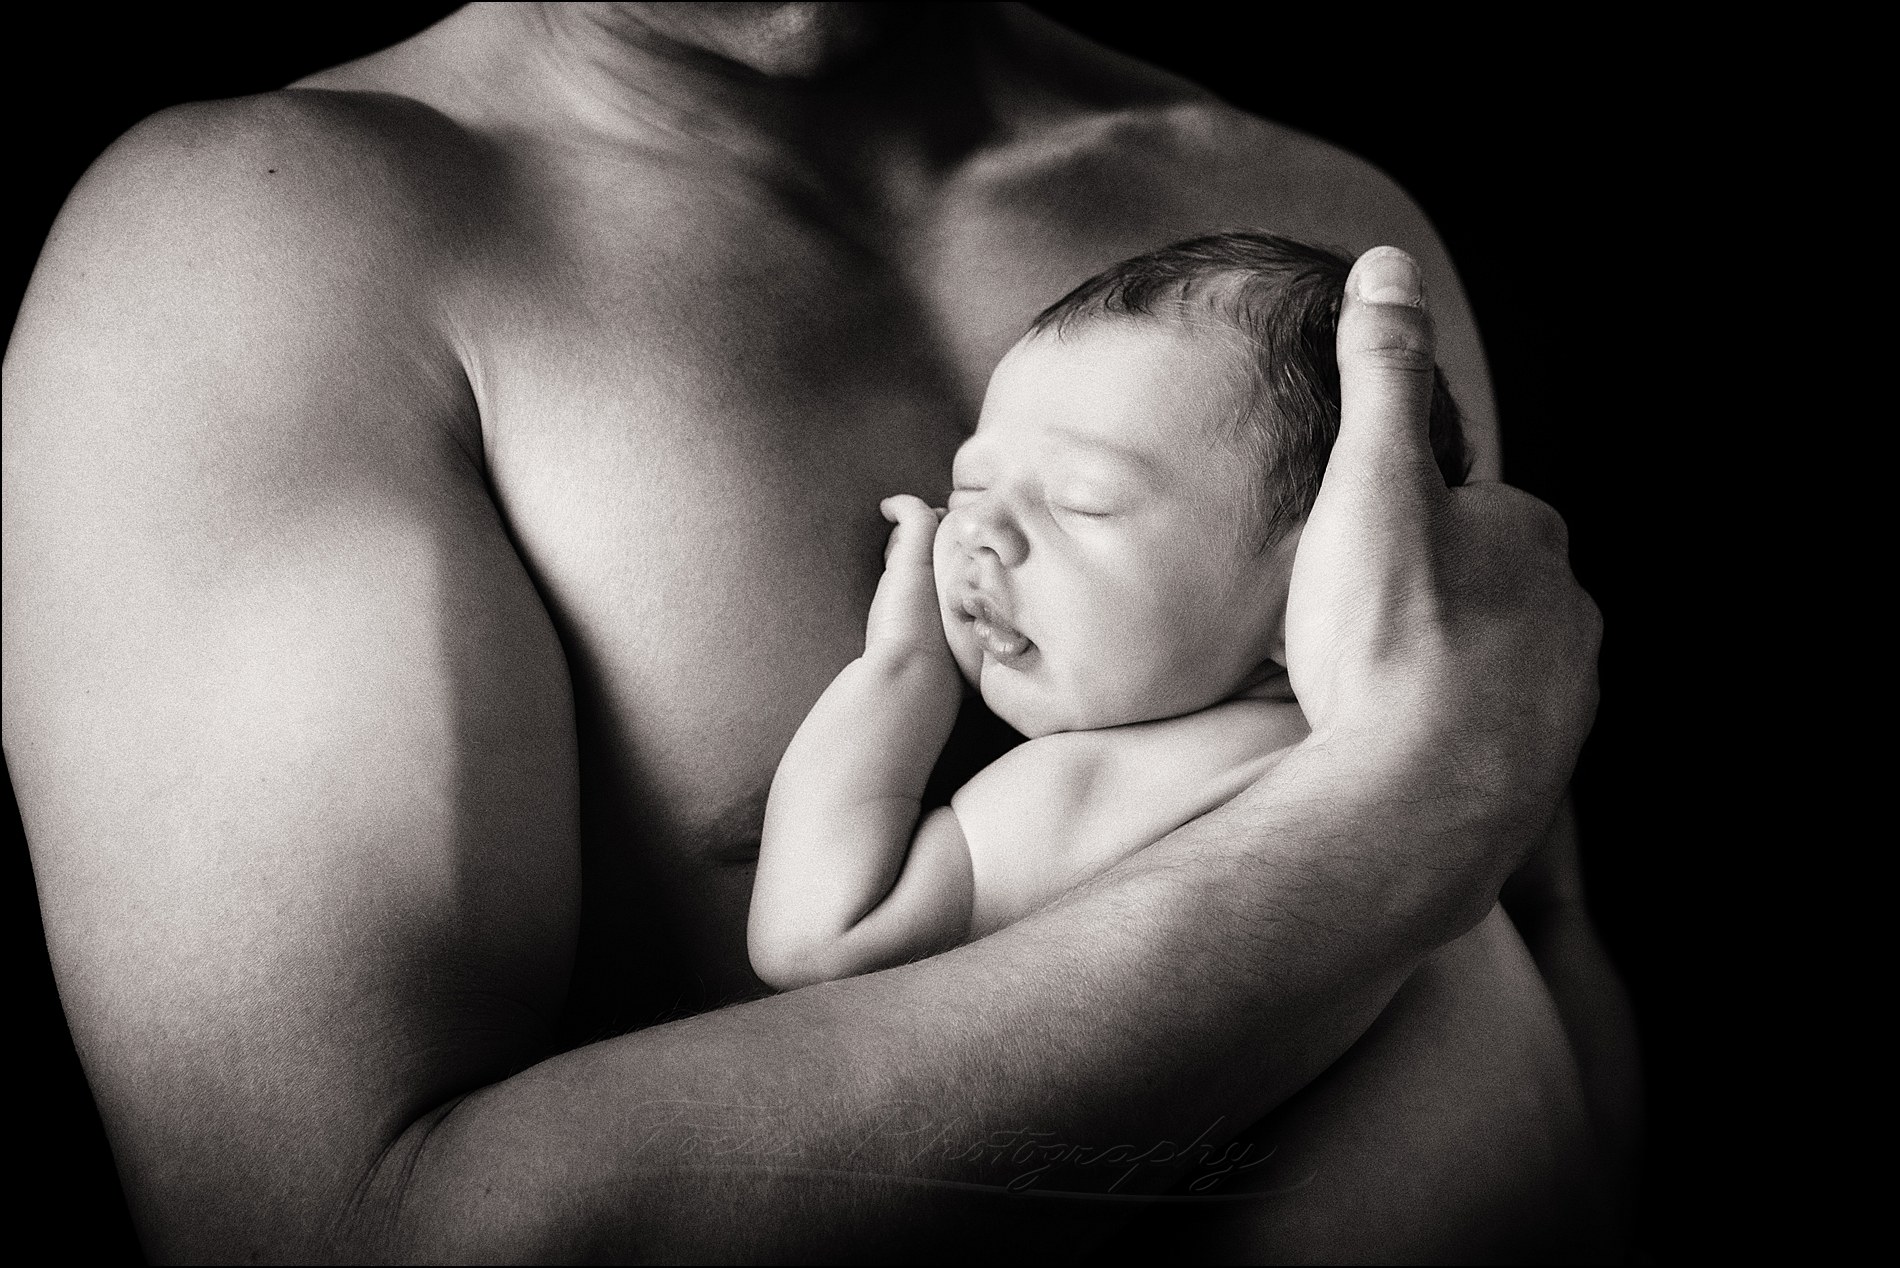 newborn baby held against father's bare chest in black and white